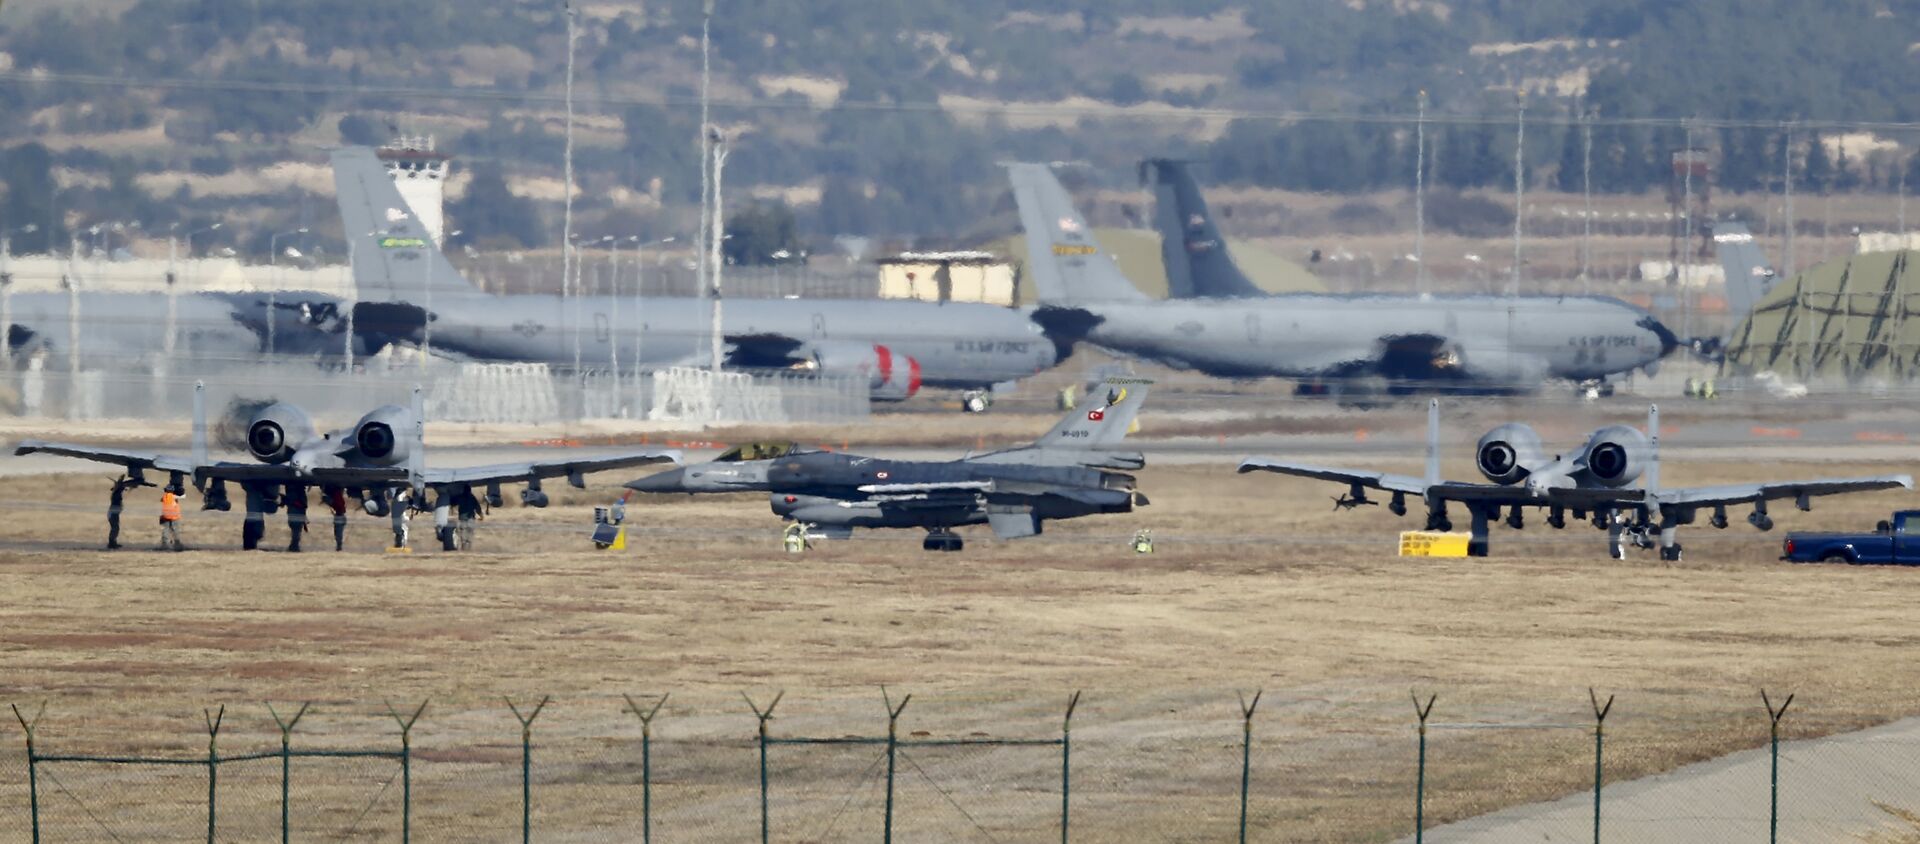 A Turkish Air Force F-16 fighter jet ( C foreground) is seen between US Air Force A-10 Thunderbolt II fighter jets at Incirlik airbase in the southern city of Adana, Turkey, file photo - Sputnik International, 1920, 01.05.2021